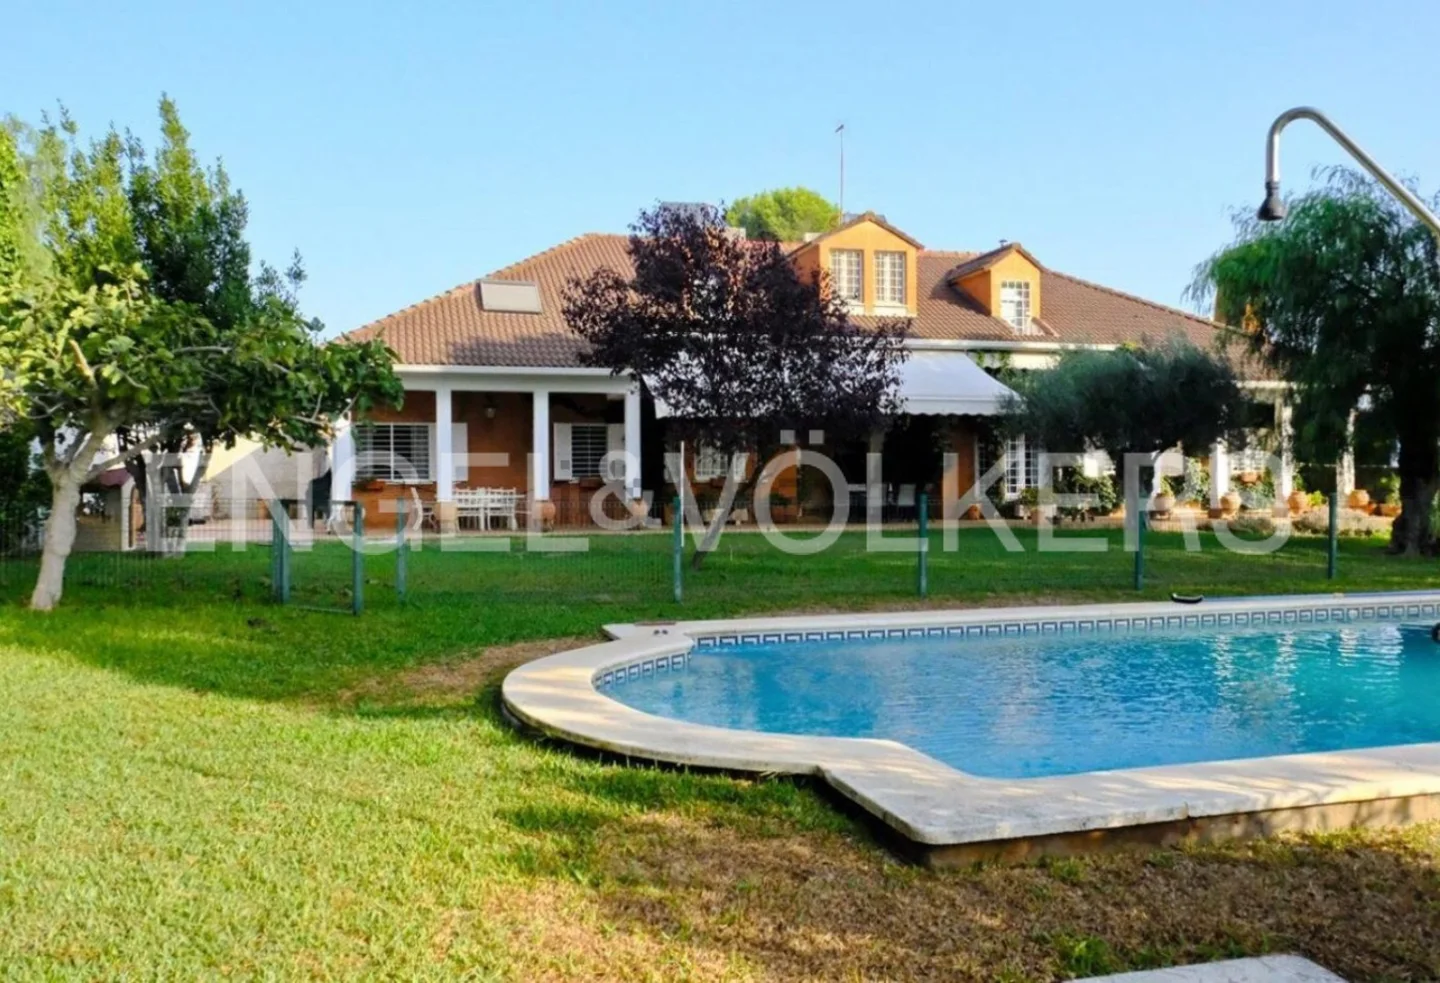 Find your home in this beautiful house, La Motilla